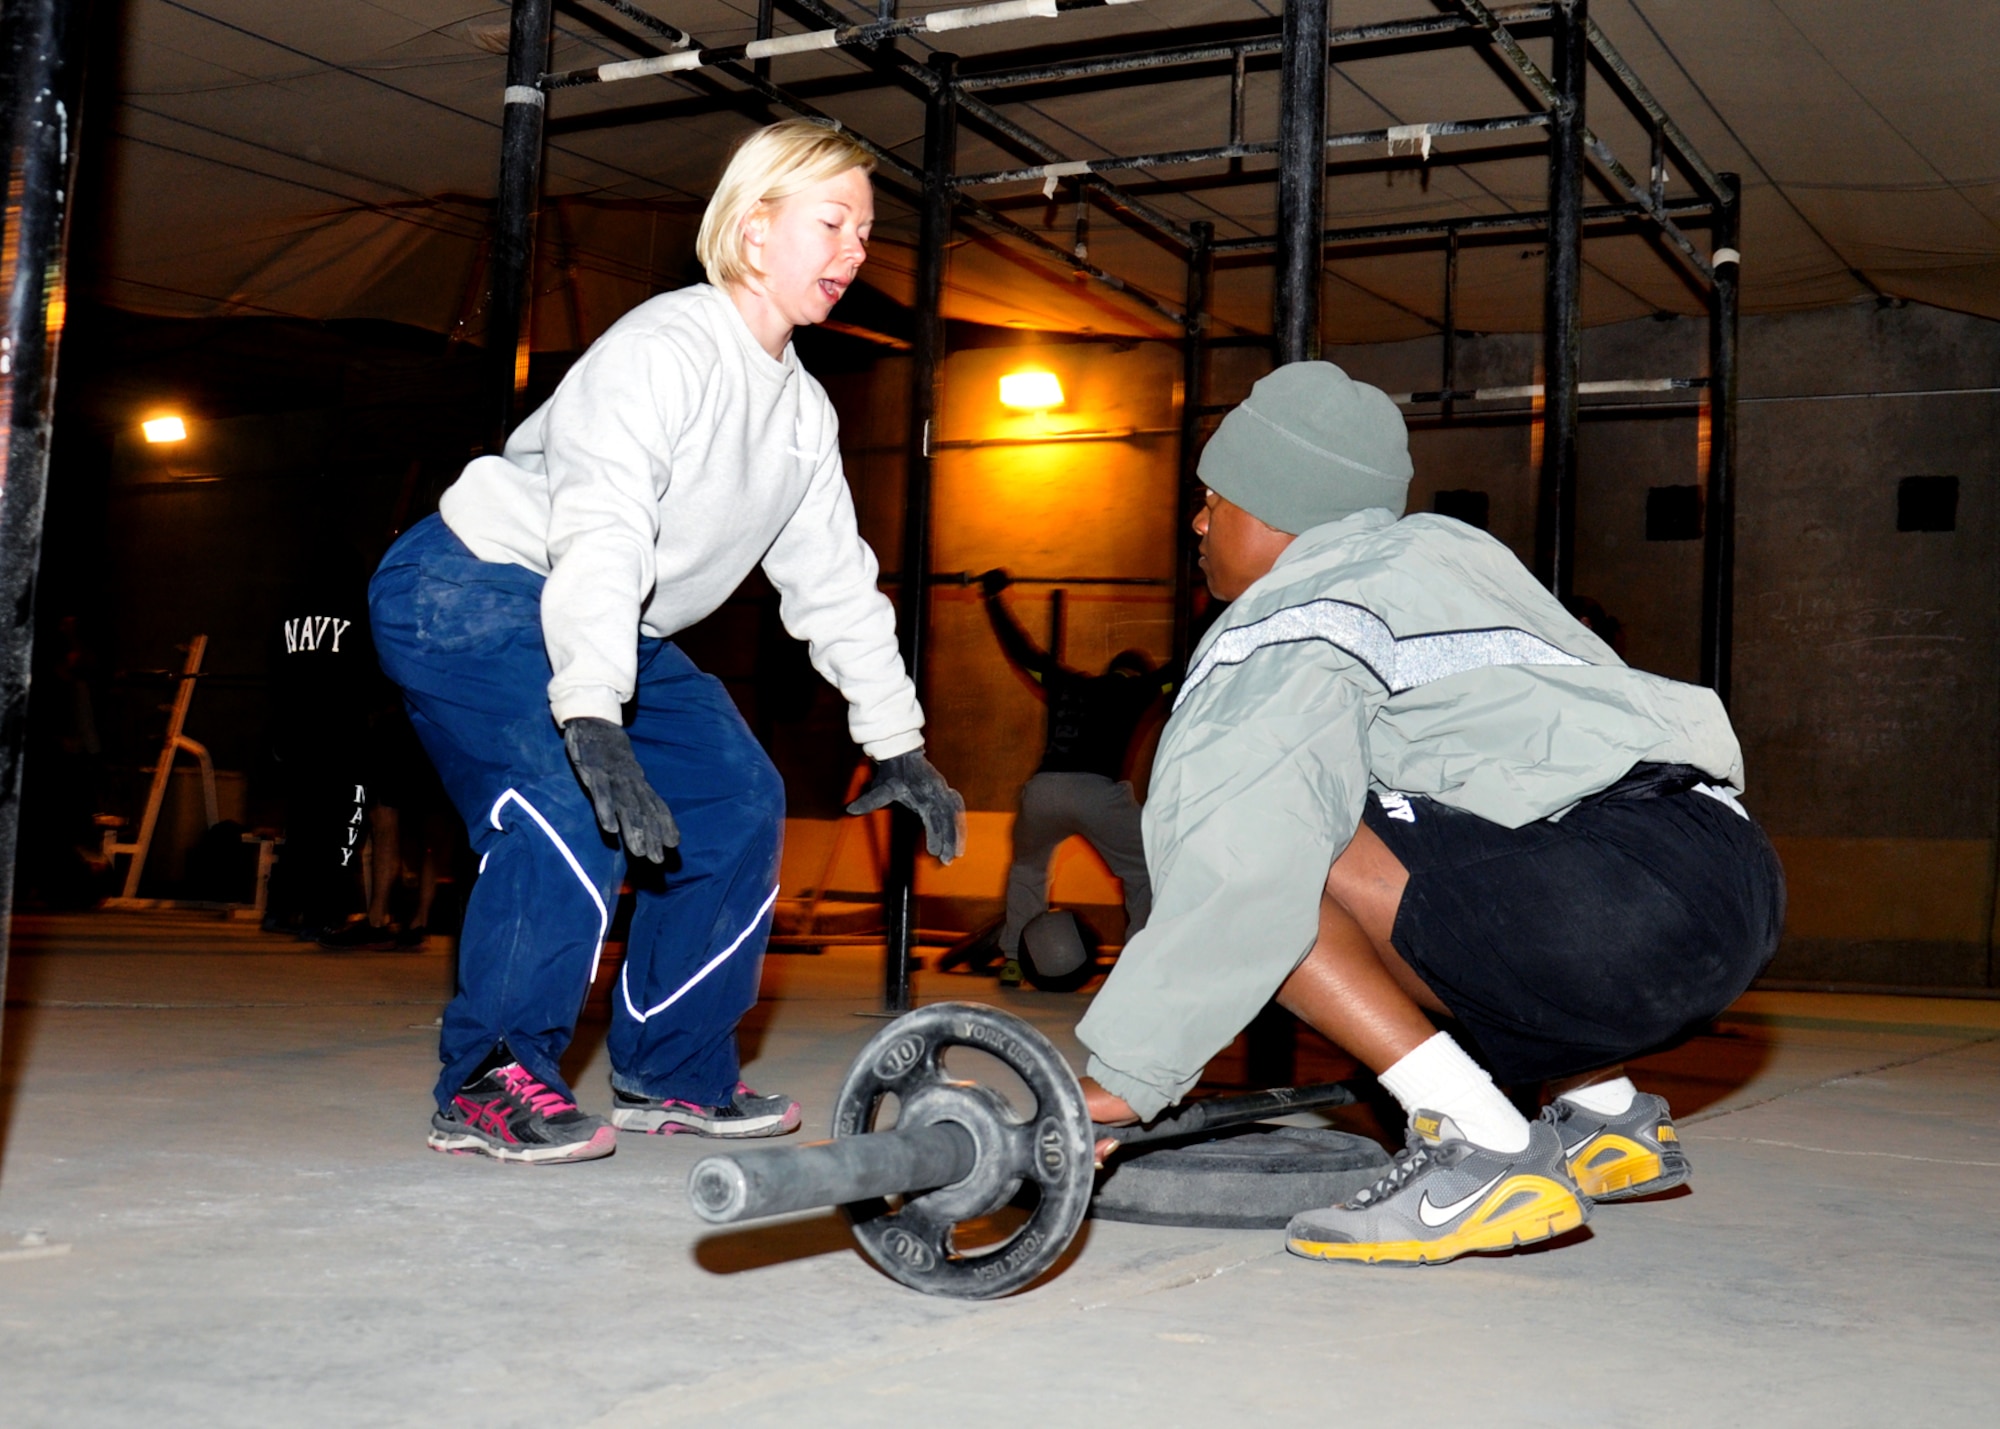 Capt. Lesley Lilly, 451st Expeditionary Force Support Flight commander and a volunteer CrossFit coach at Kandahar Airfield, shows an athlete proper form on overhead squats during the 5 a.m. CrossFit class on Jan. 14. Lilly, deployed here from Joint Base San Antonio-Lackland, coaches a 5 a.m. class six days a week. One of the most rewarding things about coaching is watching people develop and improve, she said. (U.S. Air Force photo/Master Sgt. Russell Martin)